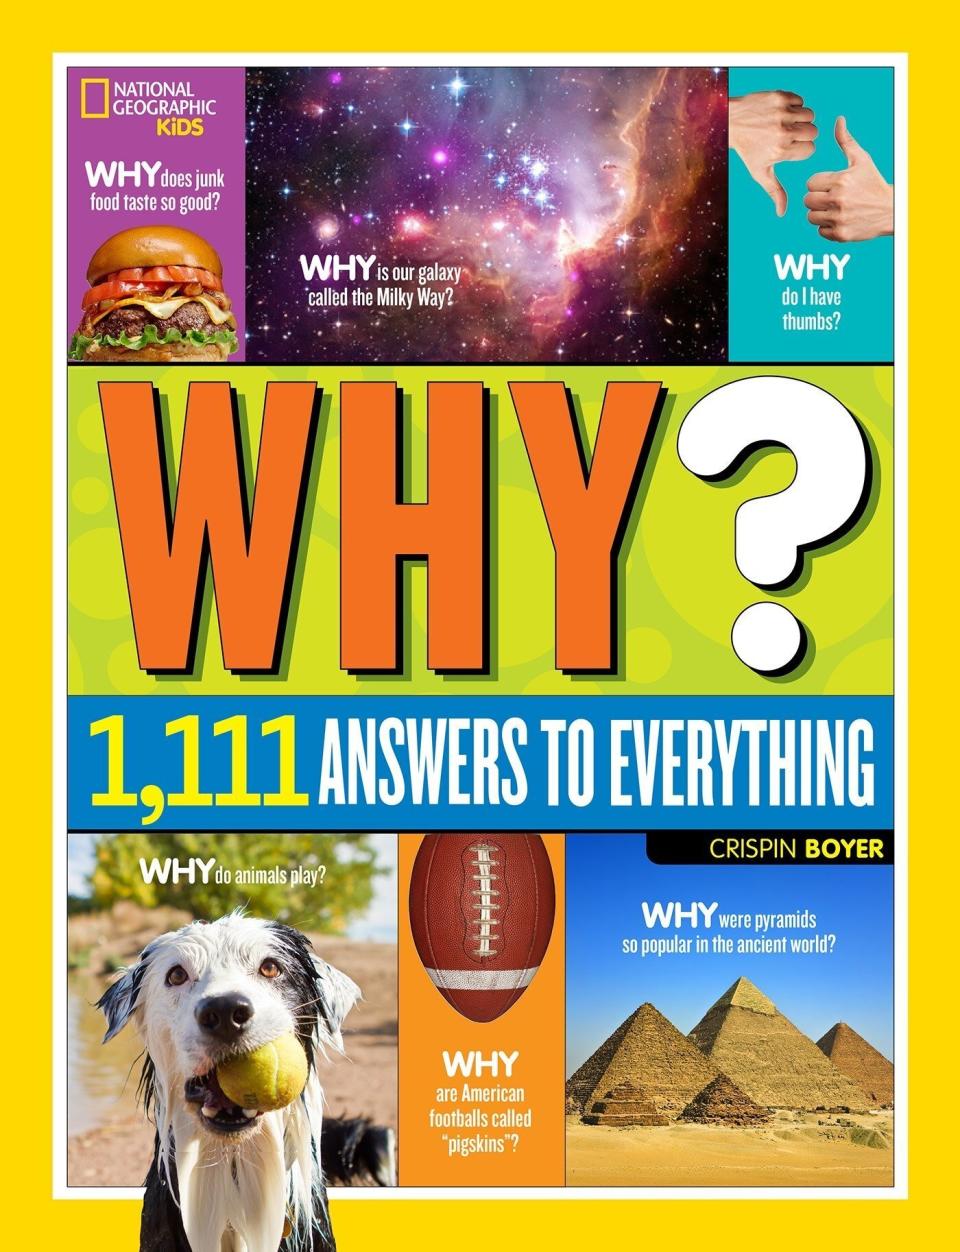 The No. 1 question asked by all children is &ldquo;why?&rdquo;&nbsp; So why not give them all the answers with this &ldquo;<strong><a href="https://amzn.to/2XtXDsu" target="_blank" rel="noopener noreferrer">National Geographic Kids Why Book</a>.</strong>"&nbsp;It answers all their questions so you don&rsquo;t always have to. <strong><a href="https://amzn.to/2XtXDsu" target="_blank" rel="noopener noreferrer">Get it on Amazon</a></strong>.